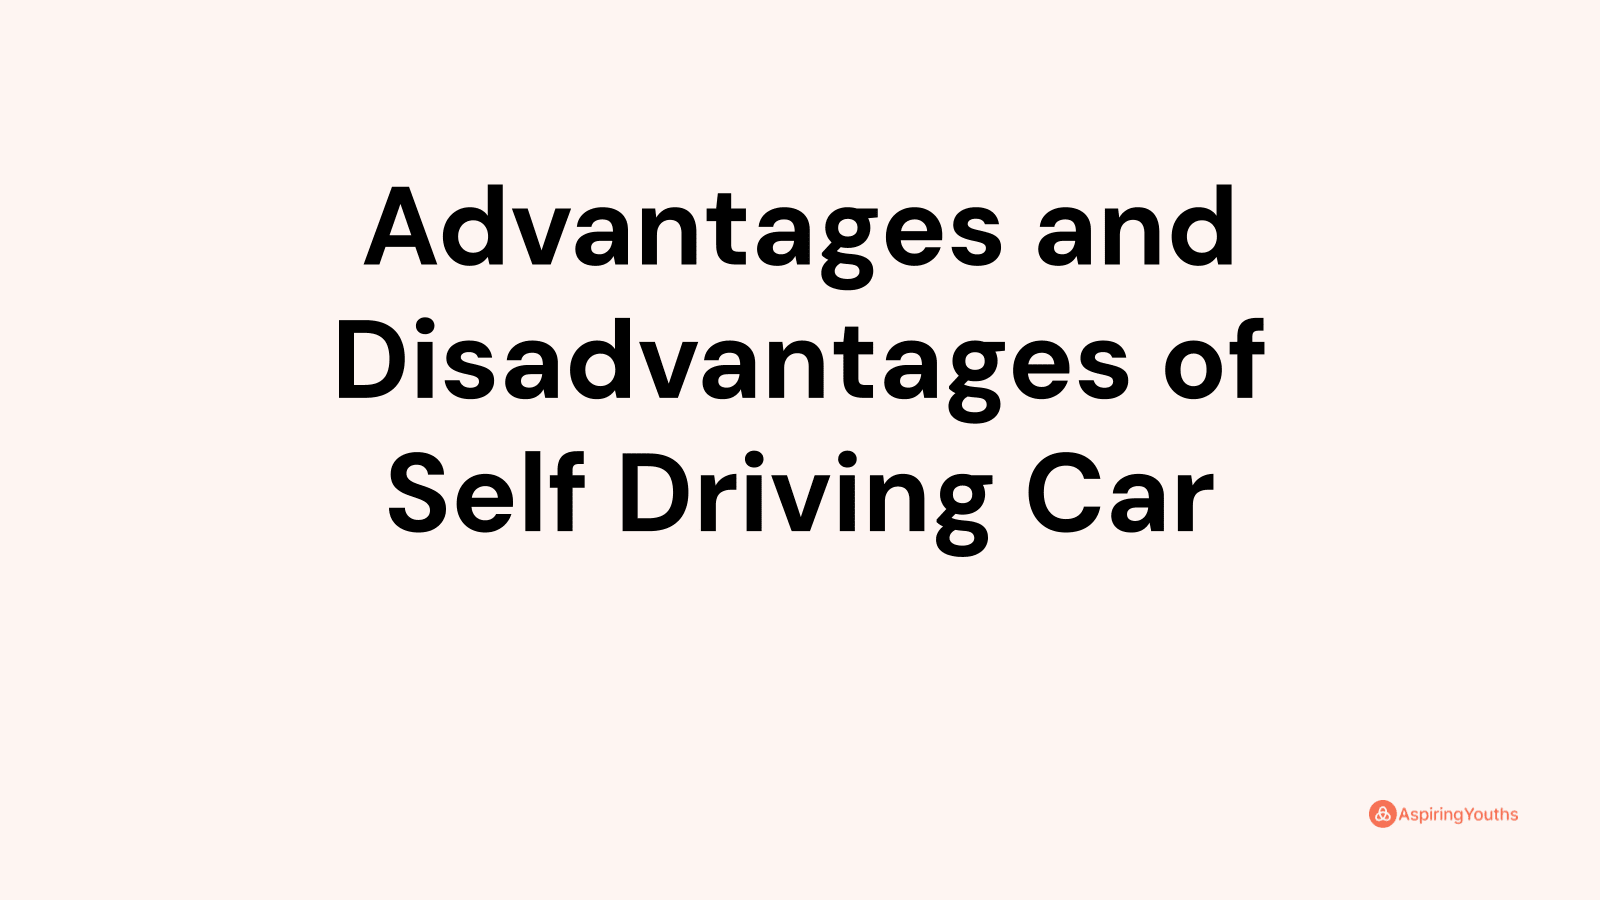 Advantages and disadvantages of Self Driving Car